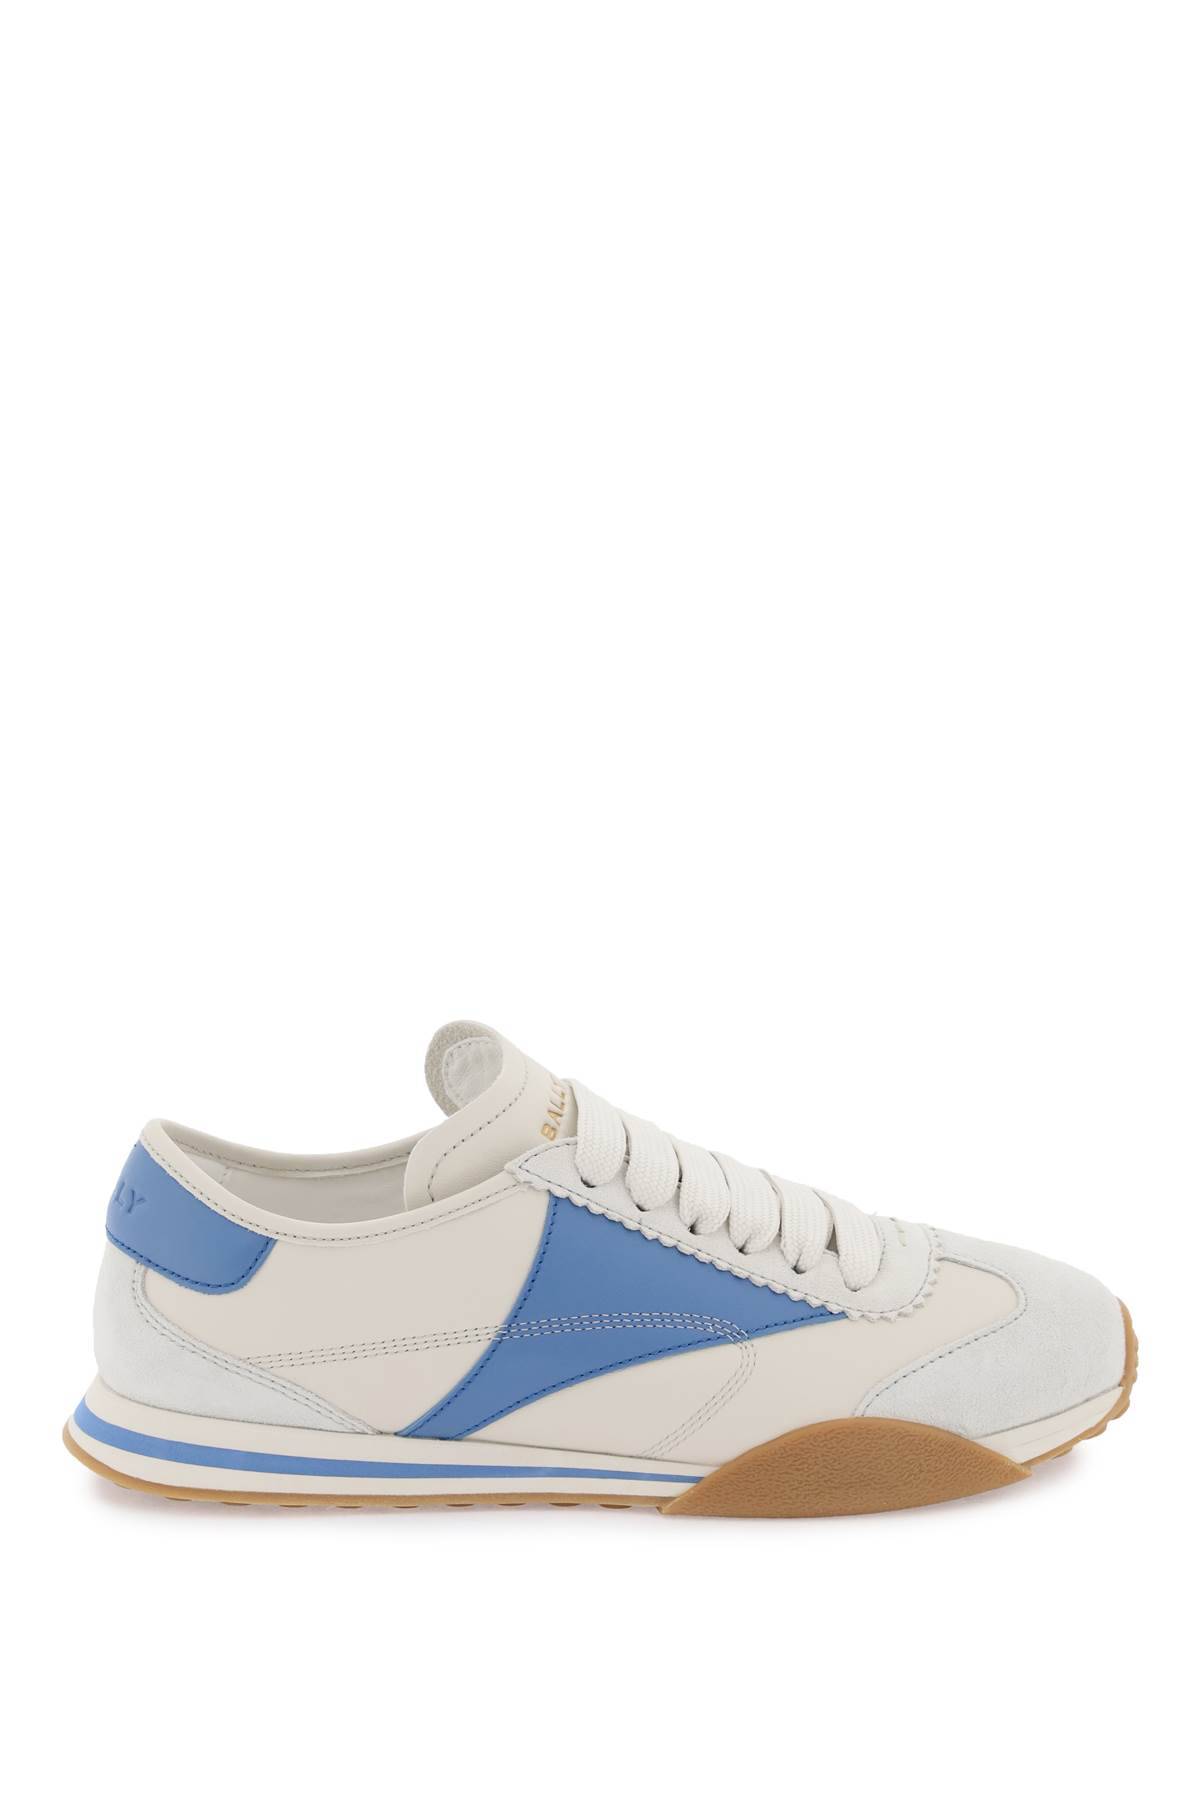 Shop Bally Leather Sonney Sneakers In Grey,blue